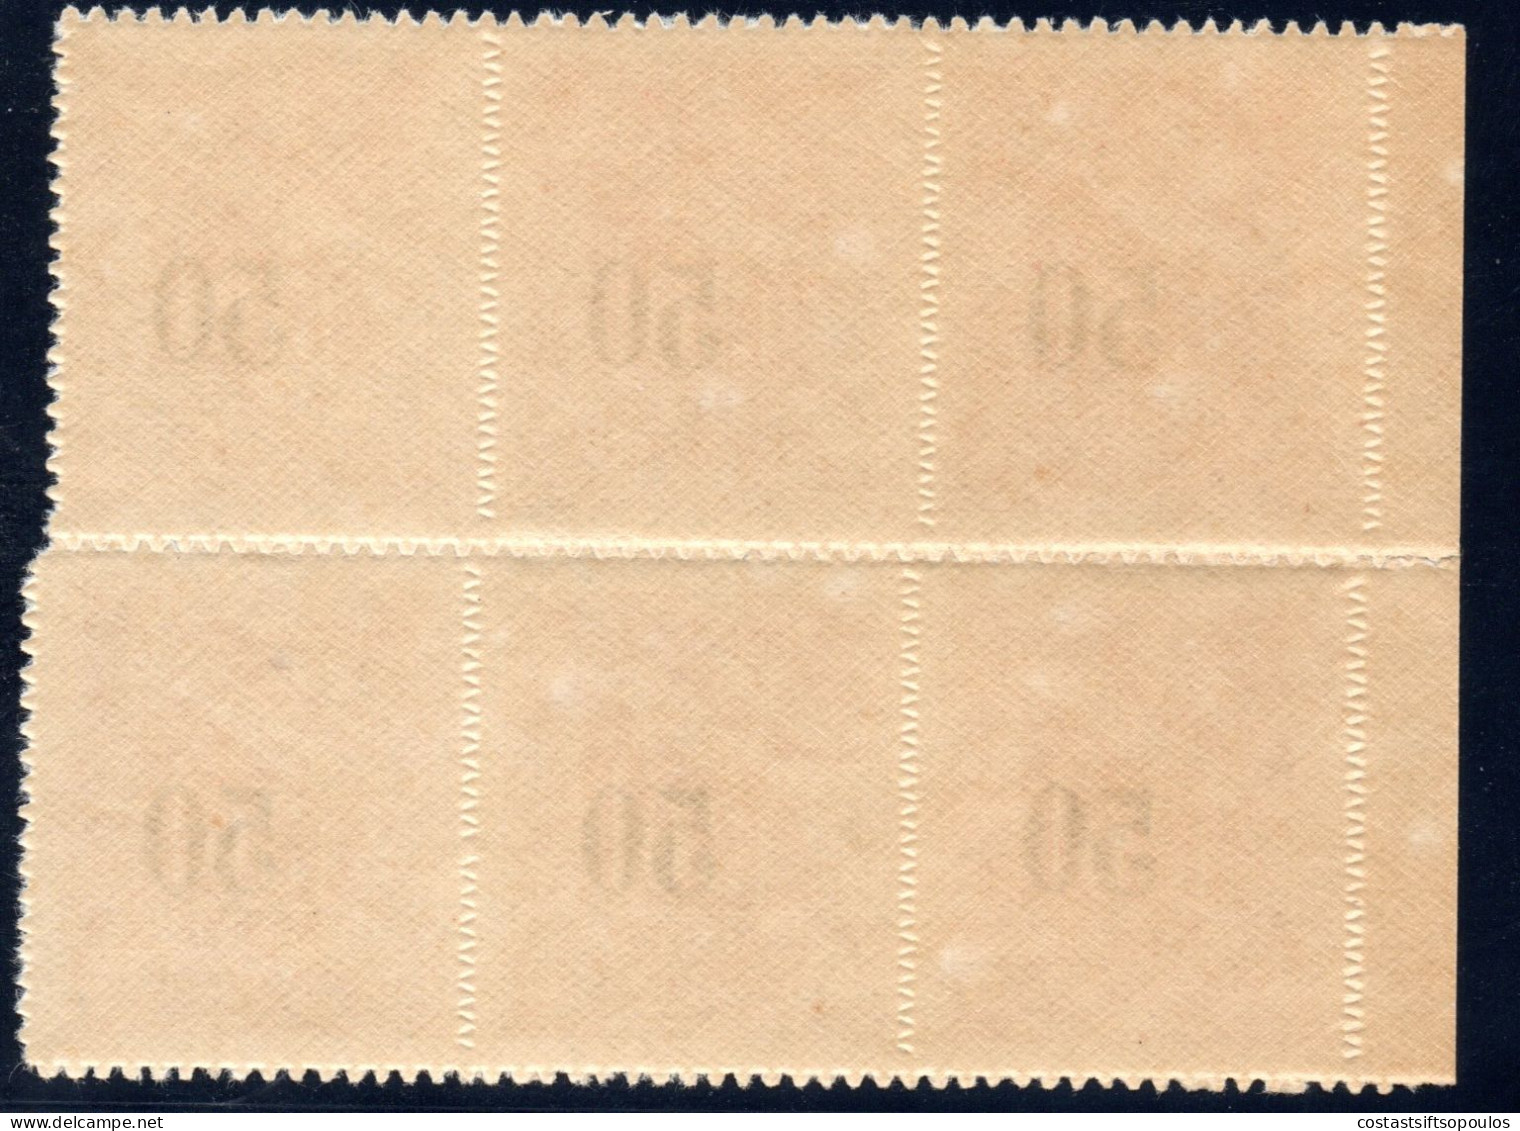 3056.1942 D109 50l/30l #D109 MISPERFORATED MNH BLOCK OF 6 - Unused Stamps